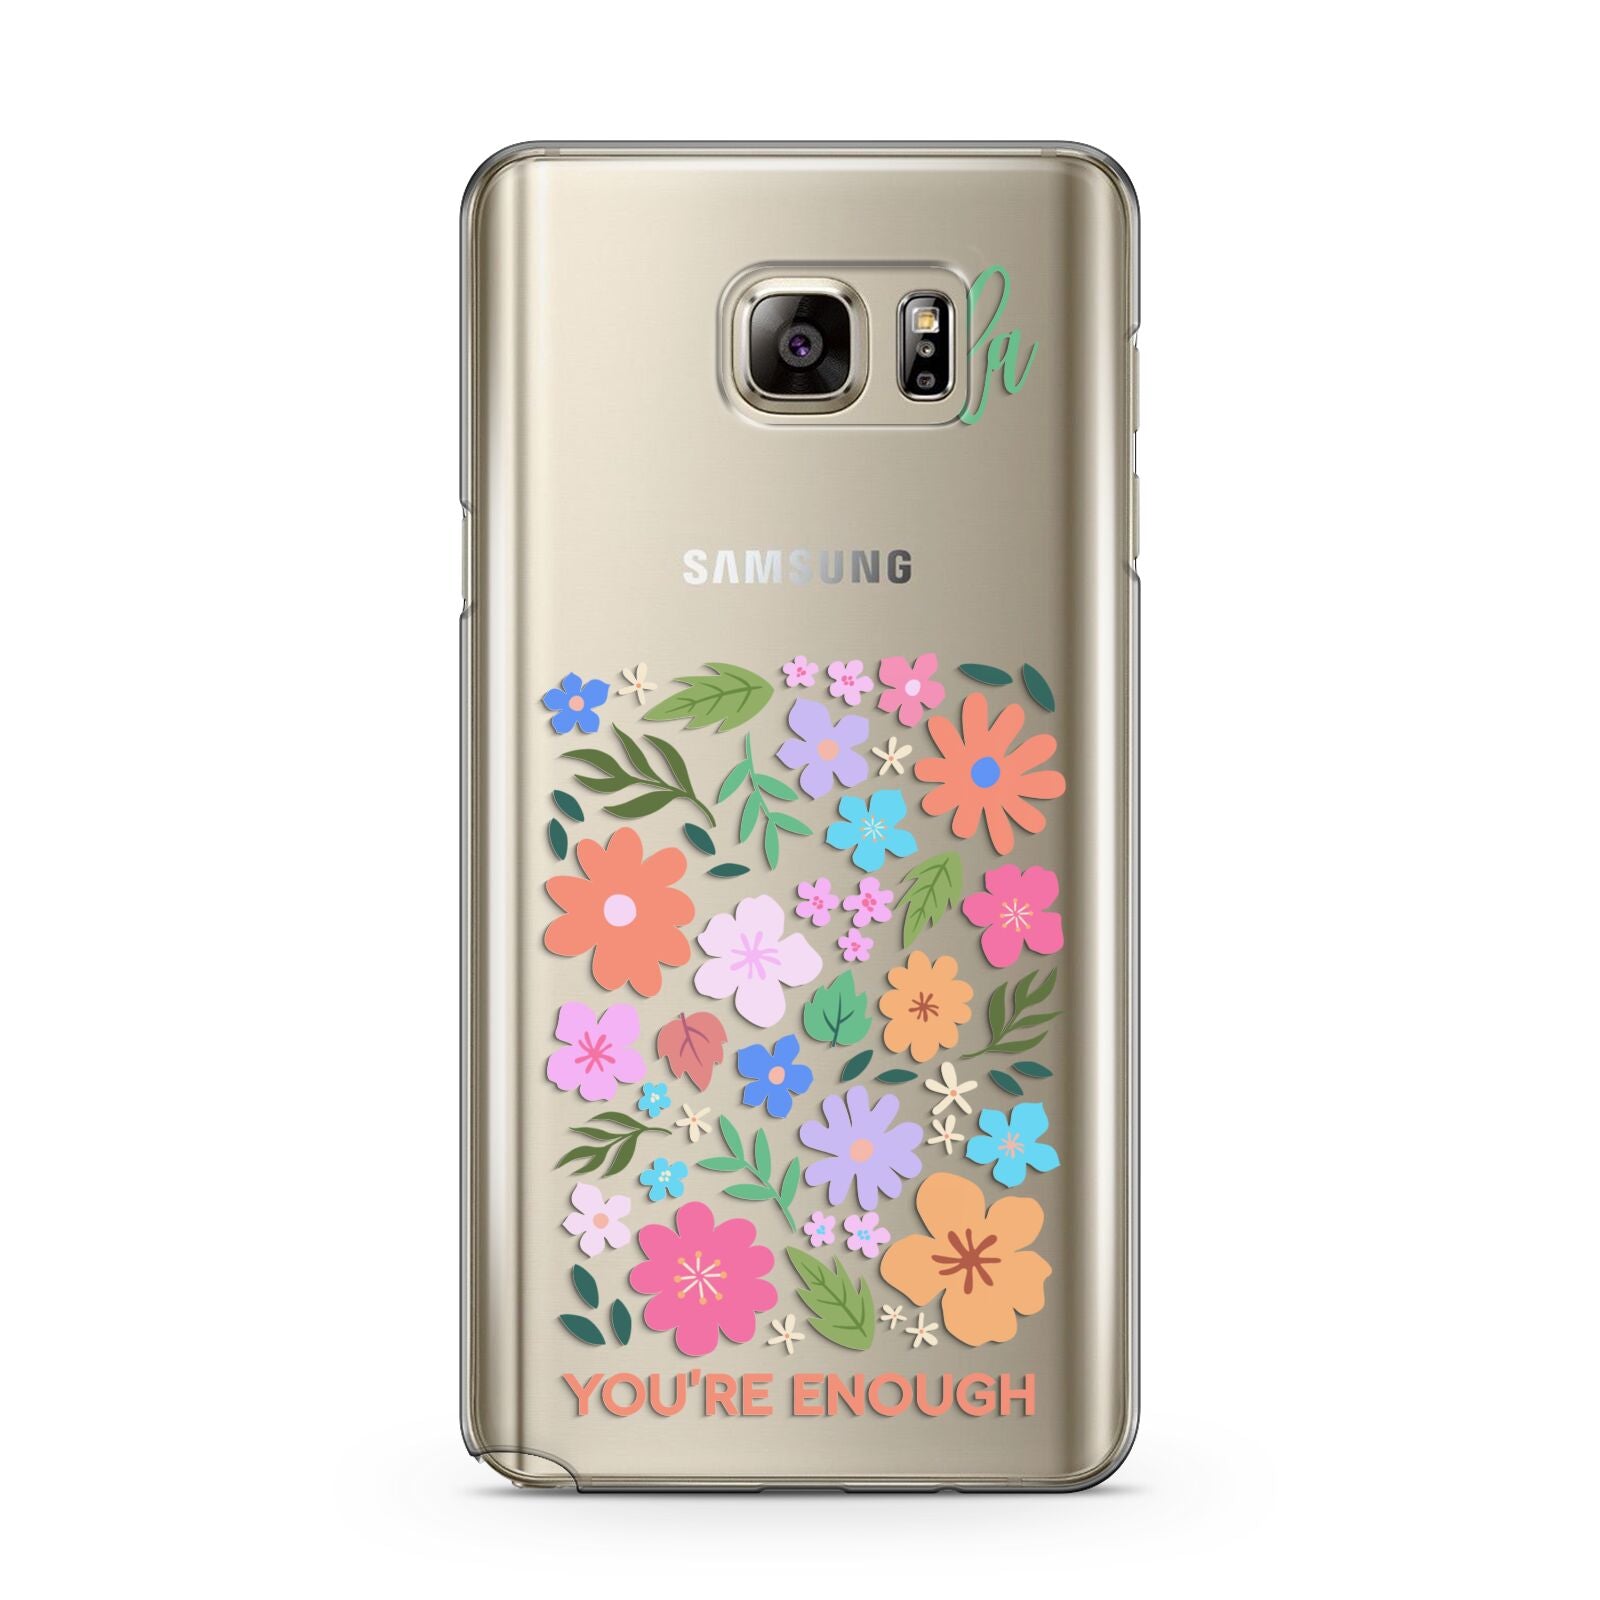 Floral Poster Samsung Galaxy Note 5 Case